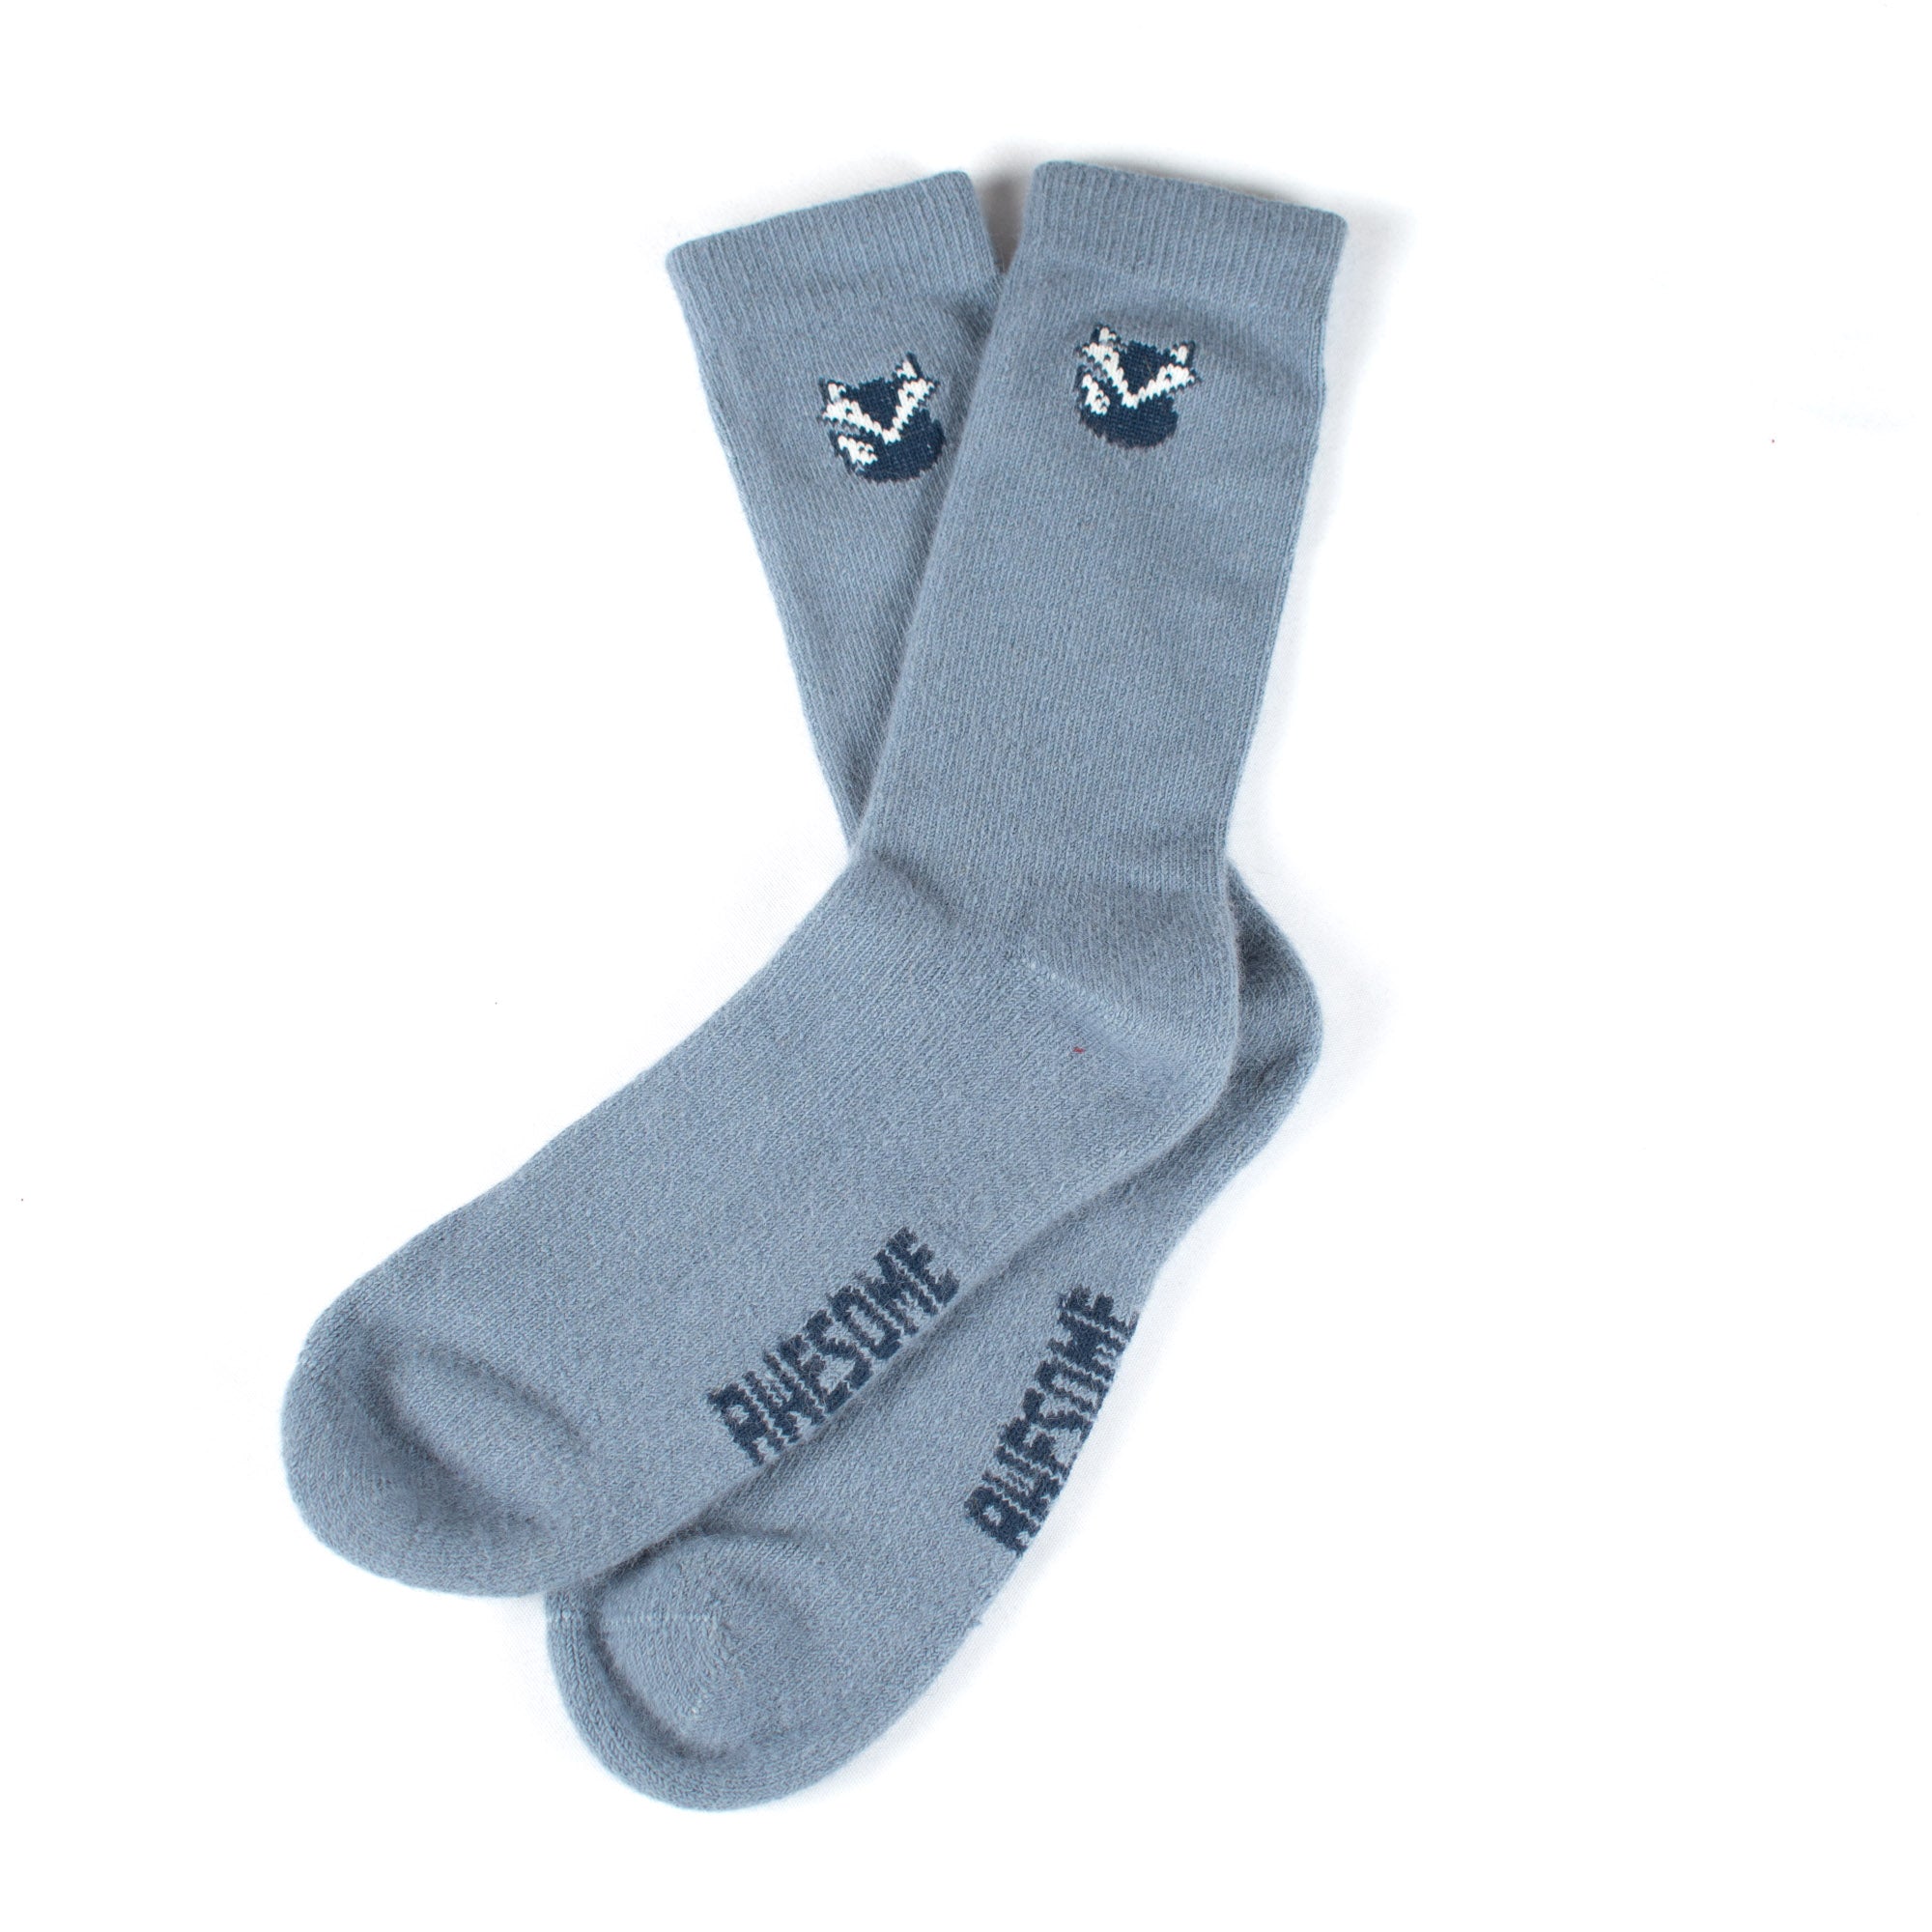 Limited Edition Awesome Possum Socks - Grown-Ups